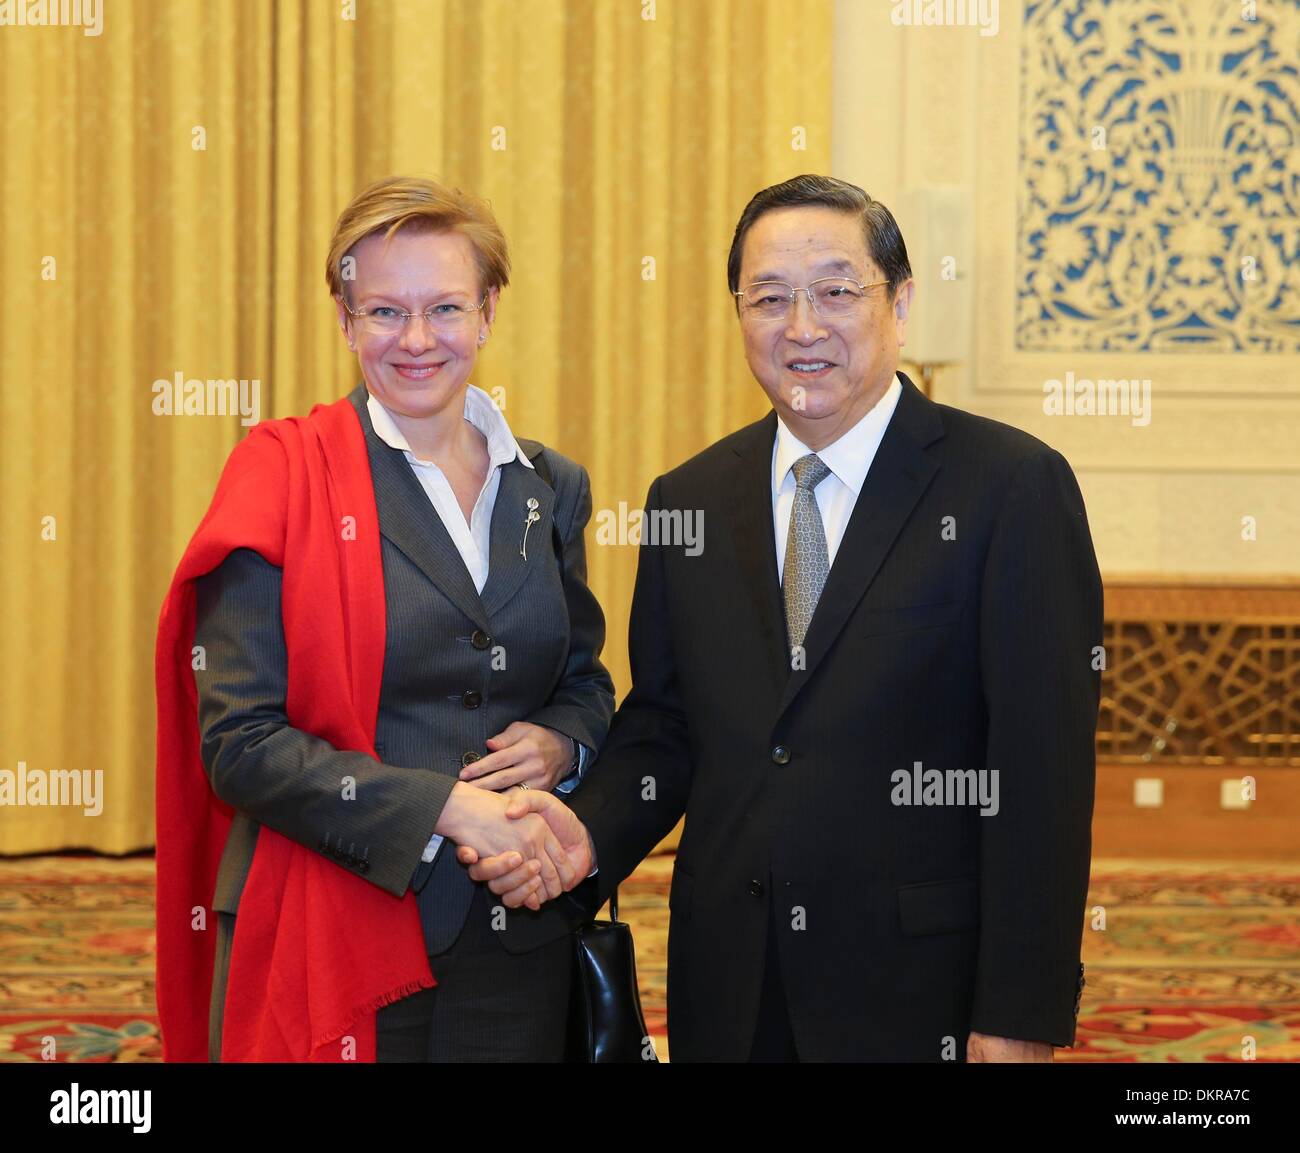 Beijing, China. 9th Dec, 2013. Yu Zhengsheng (R), chairman of the National Committee of the Chinese People's Political Consultative Conference (CPPCC), meets with Paivi Lipponen, chairwoman of the Finnish Parliament's Committee for the Future, in Beijing, capital of China, Dec. 9, 2013. © Ding Lin/Xinhua/Alamy Live News Stock Photo